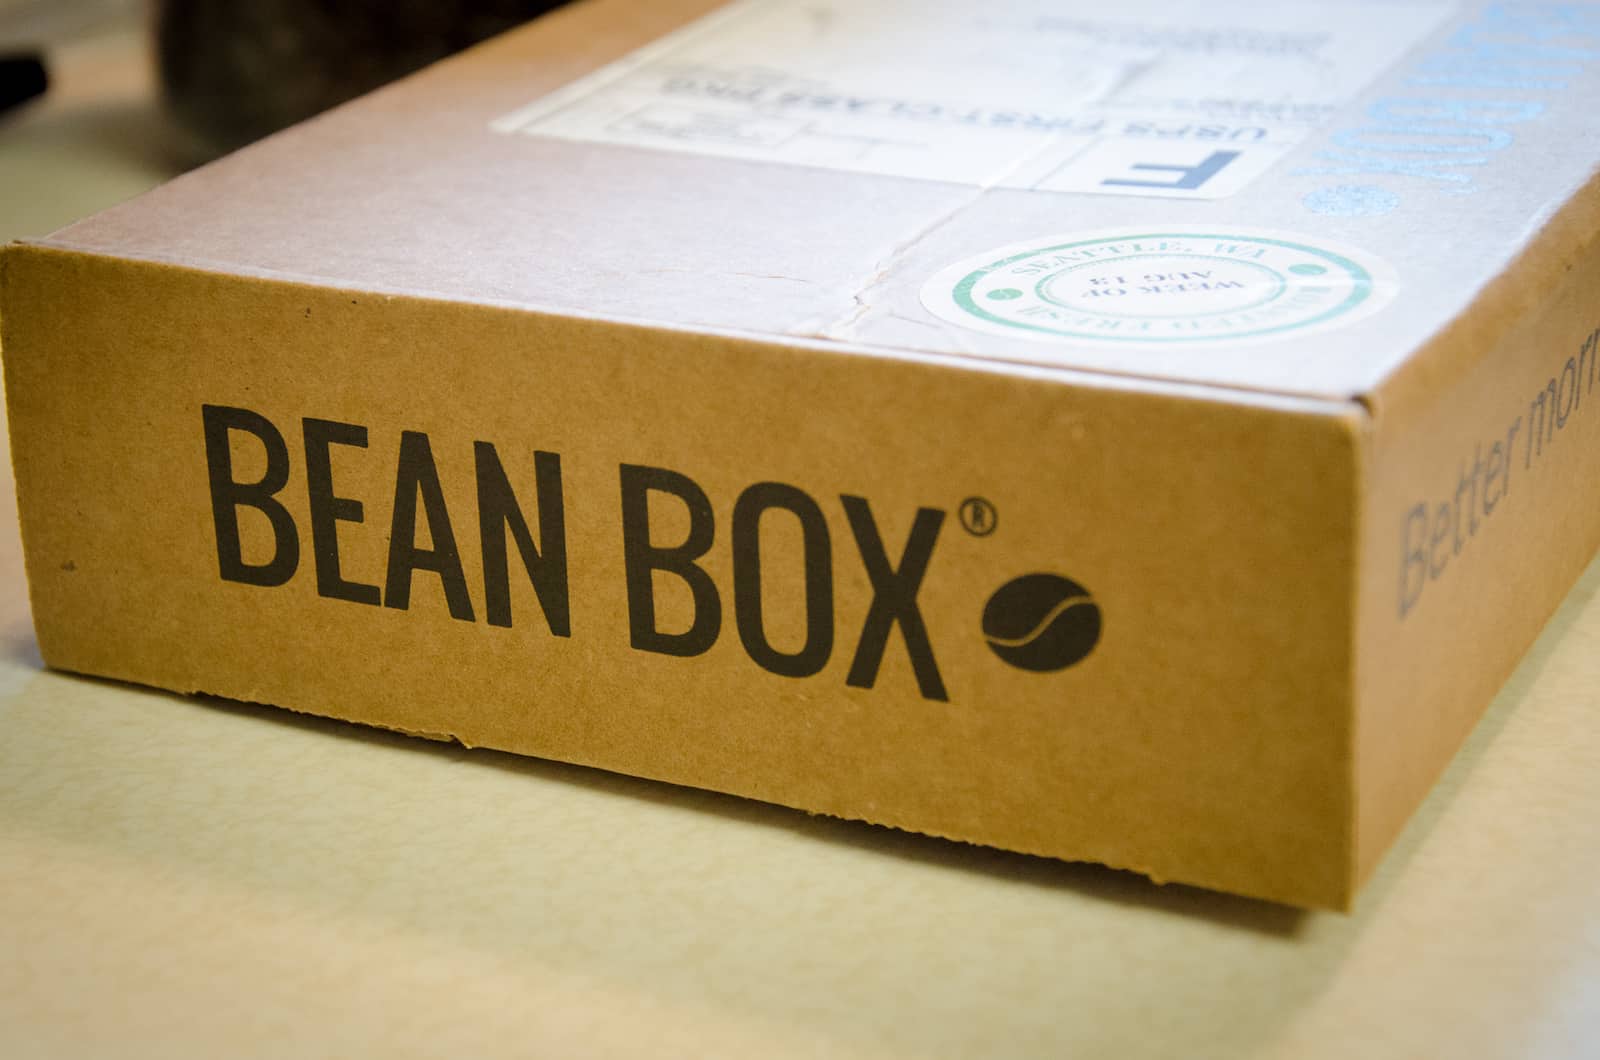 BeanBox review by LittleCoffeePlace